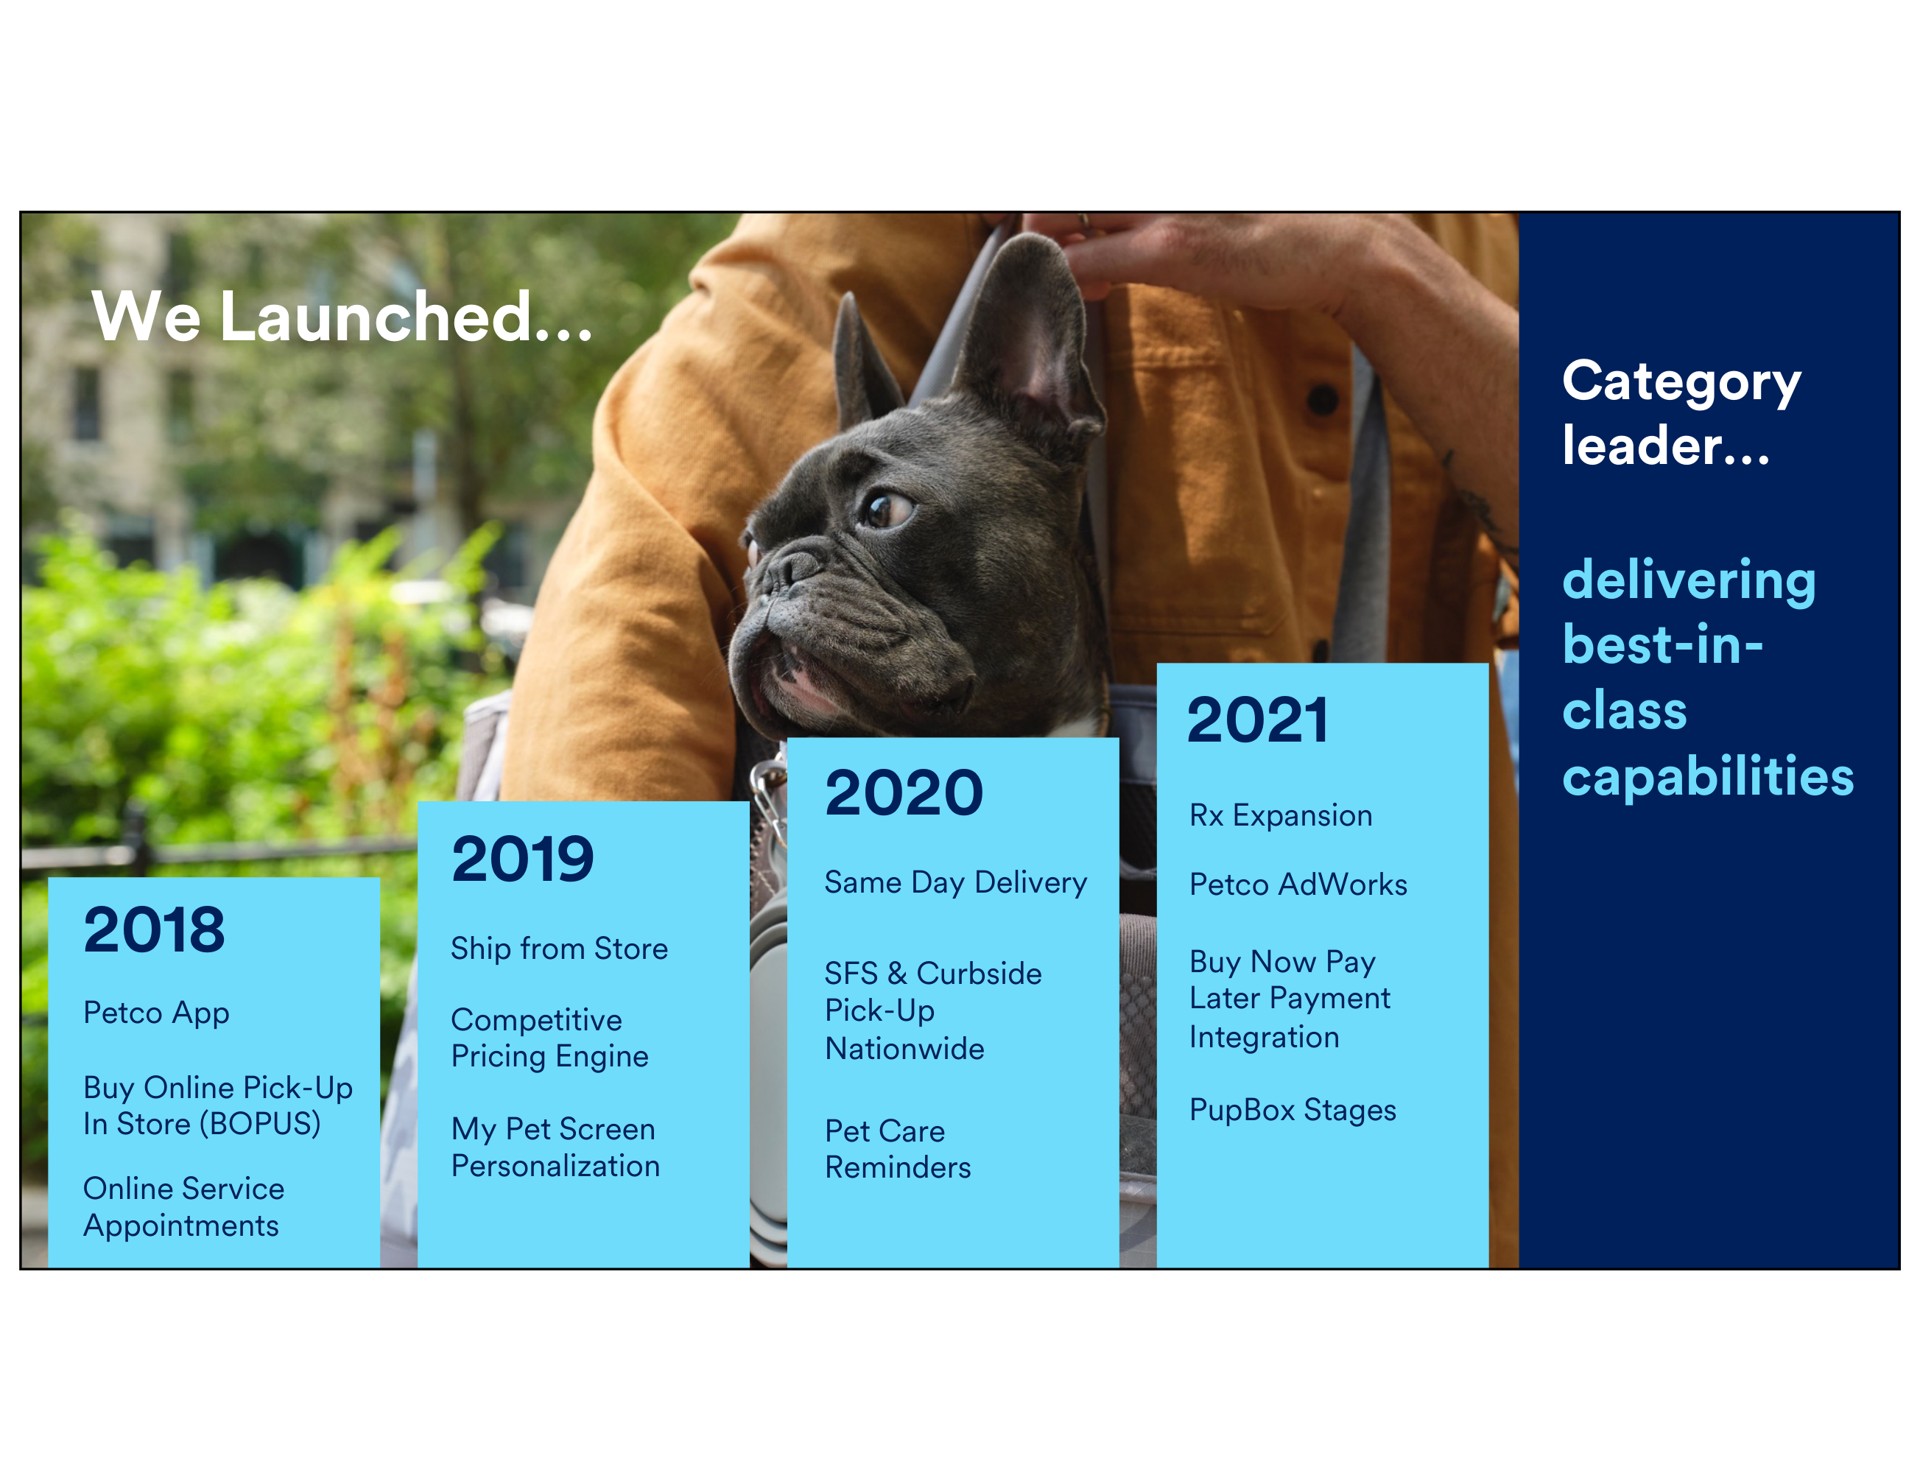 we launched category leader delivering best in class capabilities pick up nationwide buy now pay later payment integration buy pick up in store service appointments my pet screen personalization competitive pricing engine pet care reminders same day delivery ship from store stages expansion | Petco